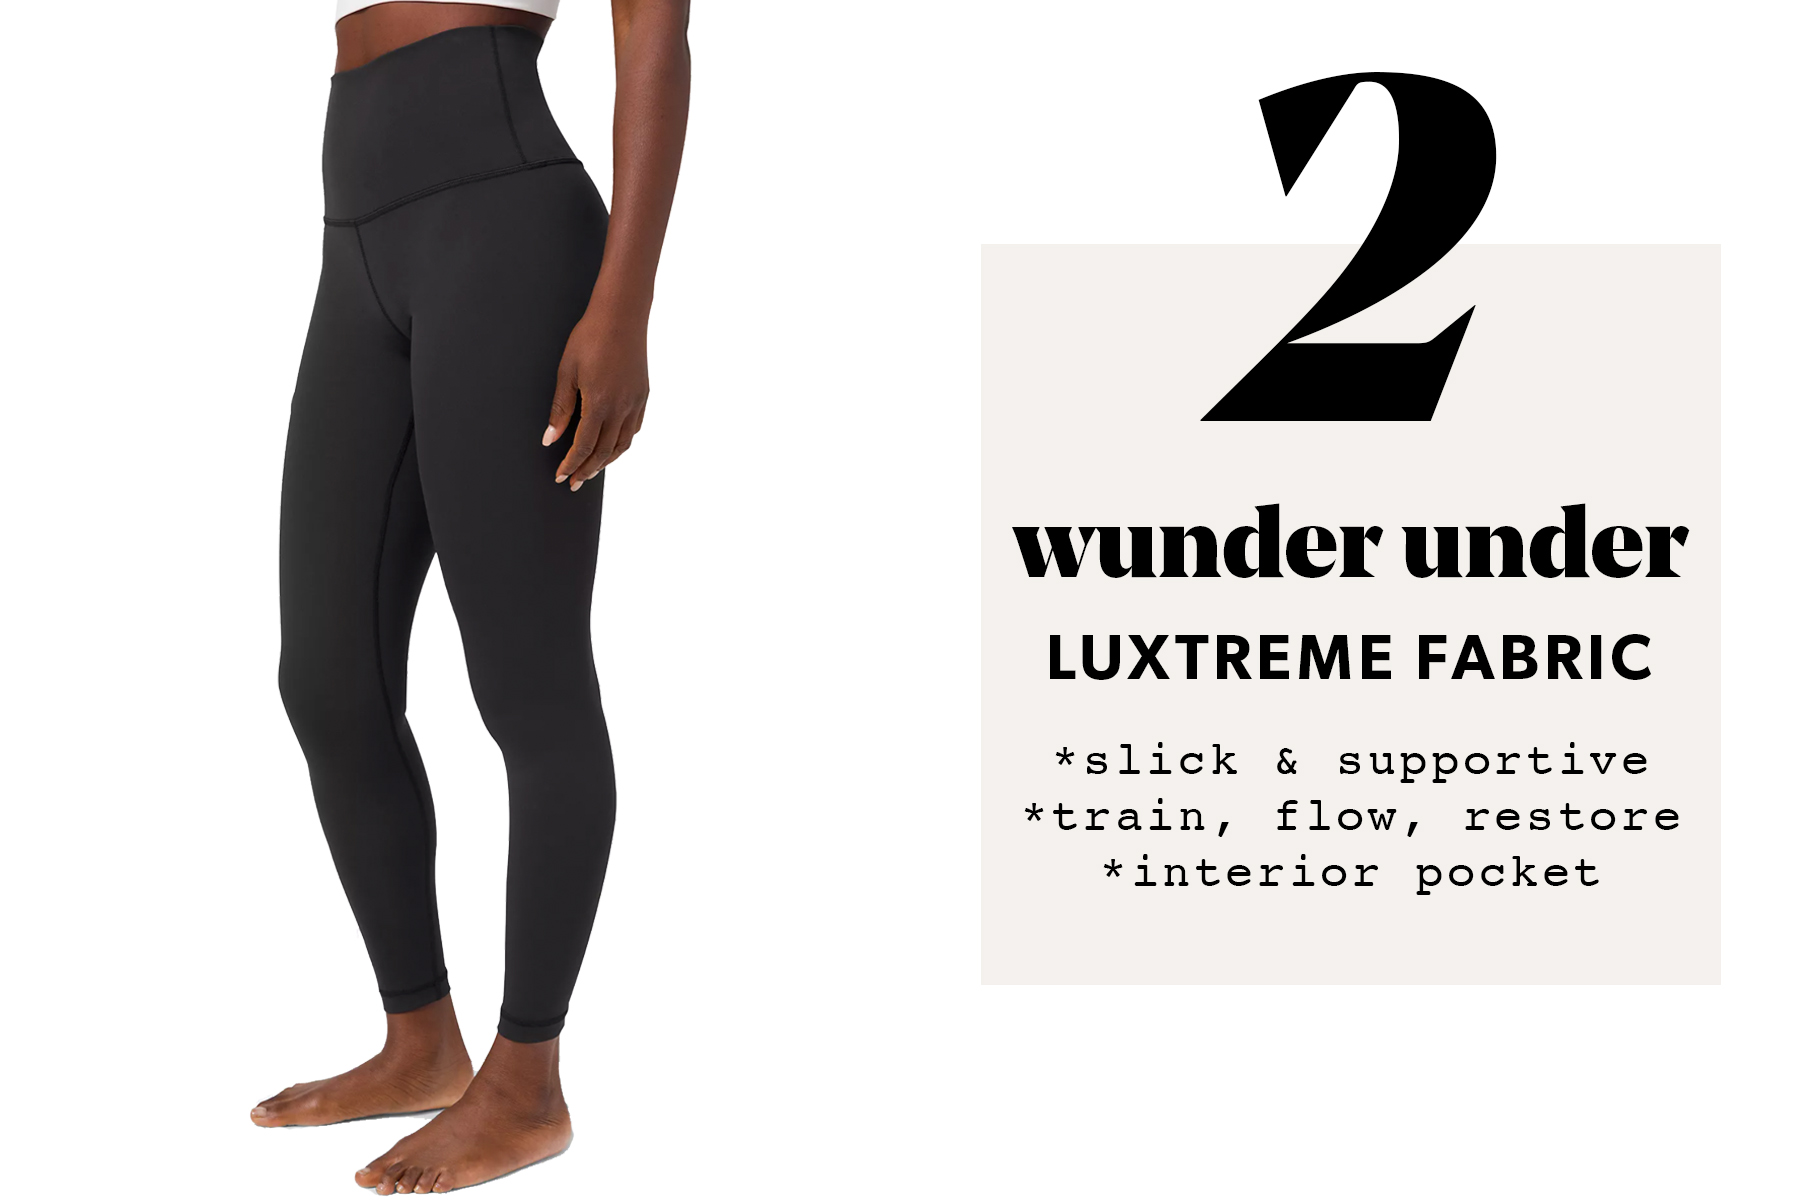 What Are The Thickest Lululemon Leggings? – solowomen